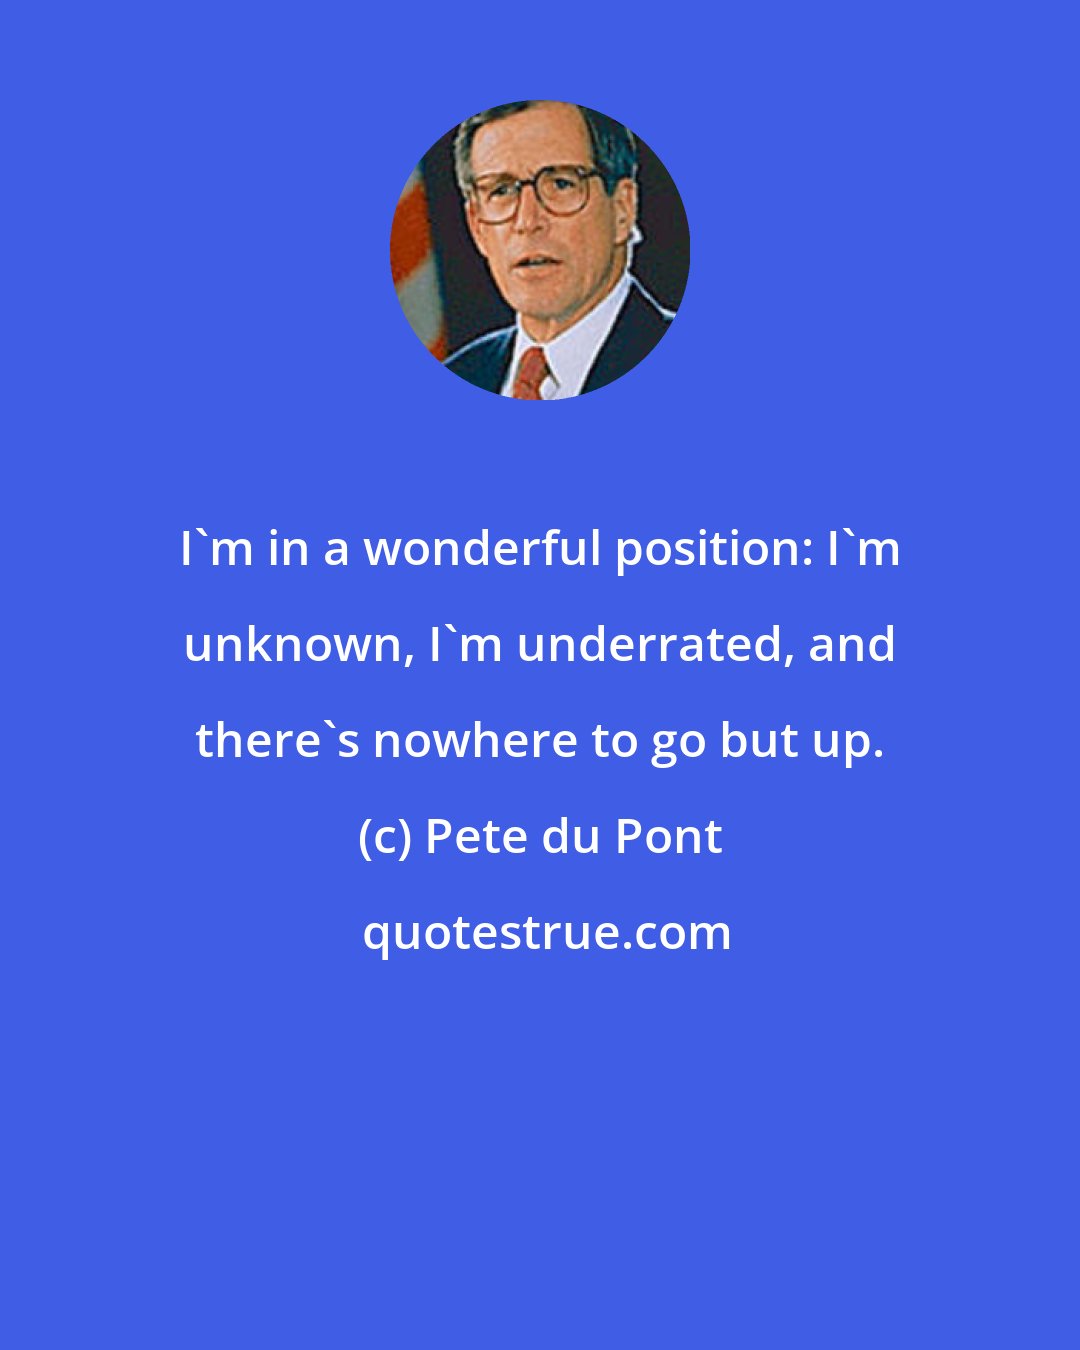 Pete du Pont: I'm in a wonderful position: I'm unknown, I'm underrated, and there's nowhere to go but up.